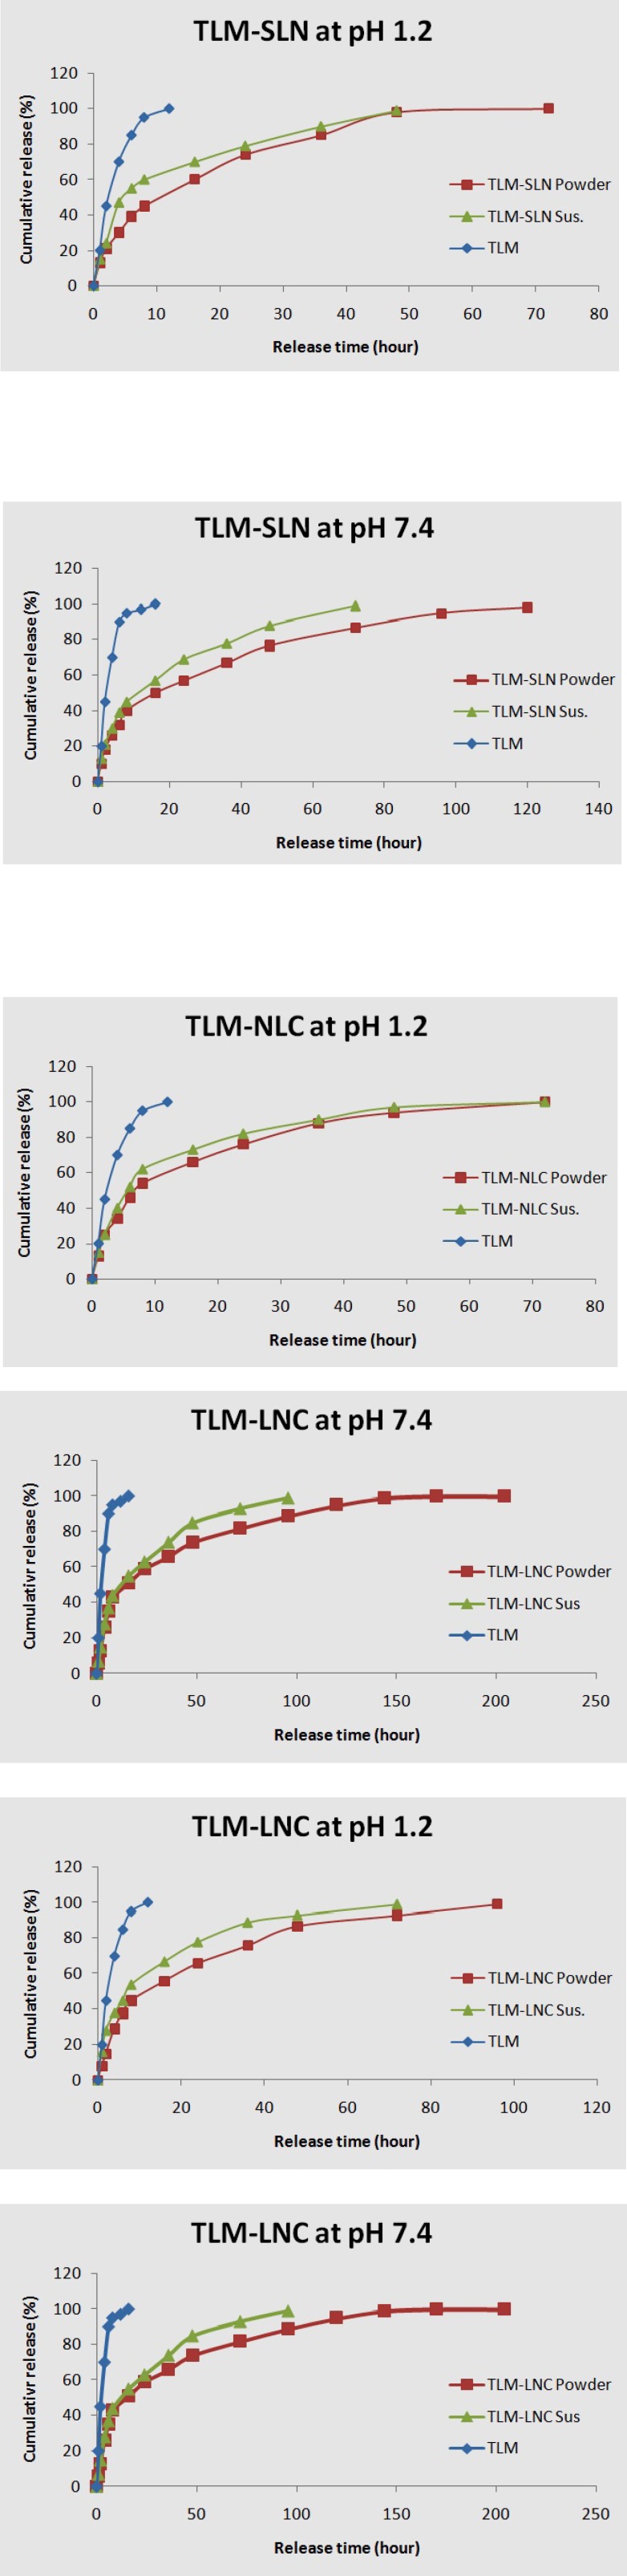 In-vitro release profiles of different TLM-LNPs.